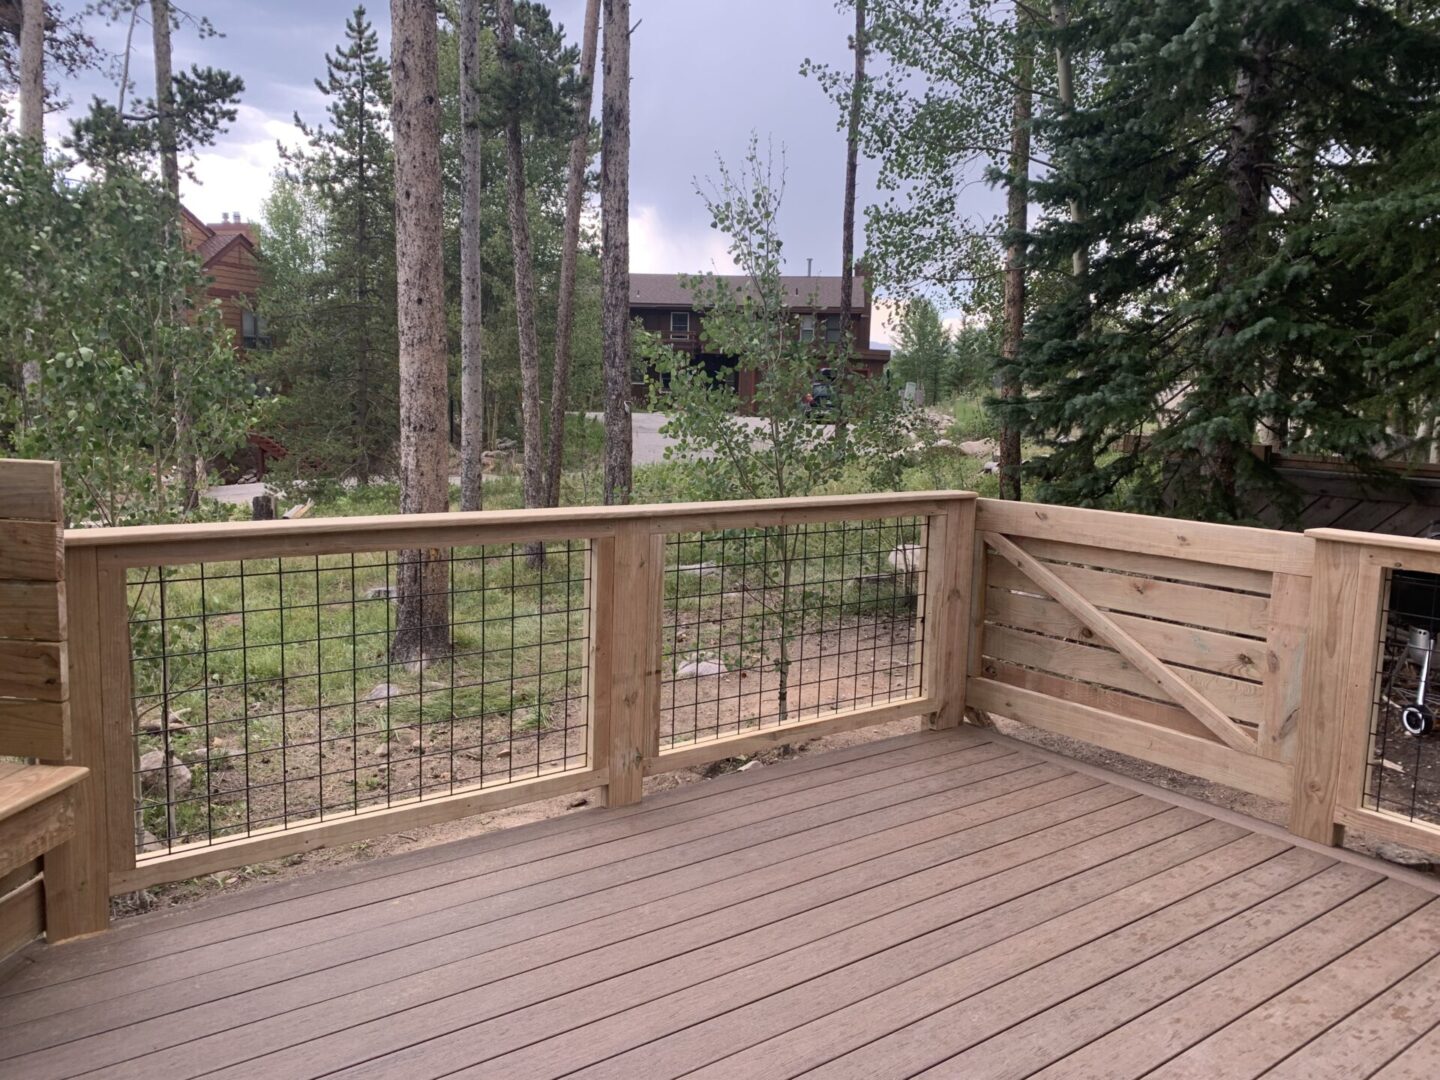 Check out the Best Decks for Residential Properties